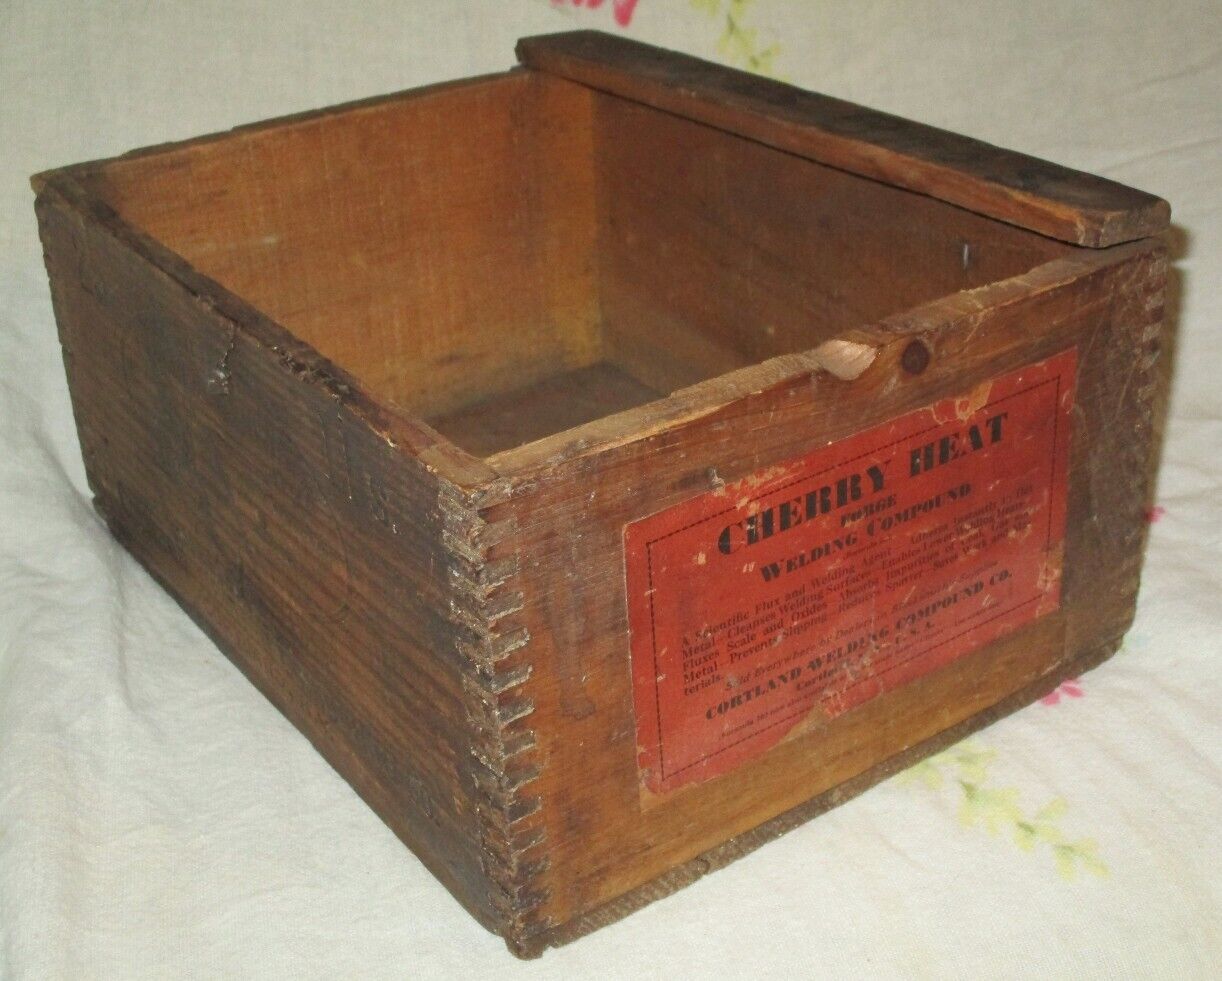 Antique CHERRY HEAT WELDING Jointed CLMAX Vintage Shipping Crate BLACKSMITH BOX